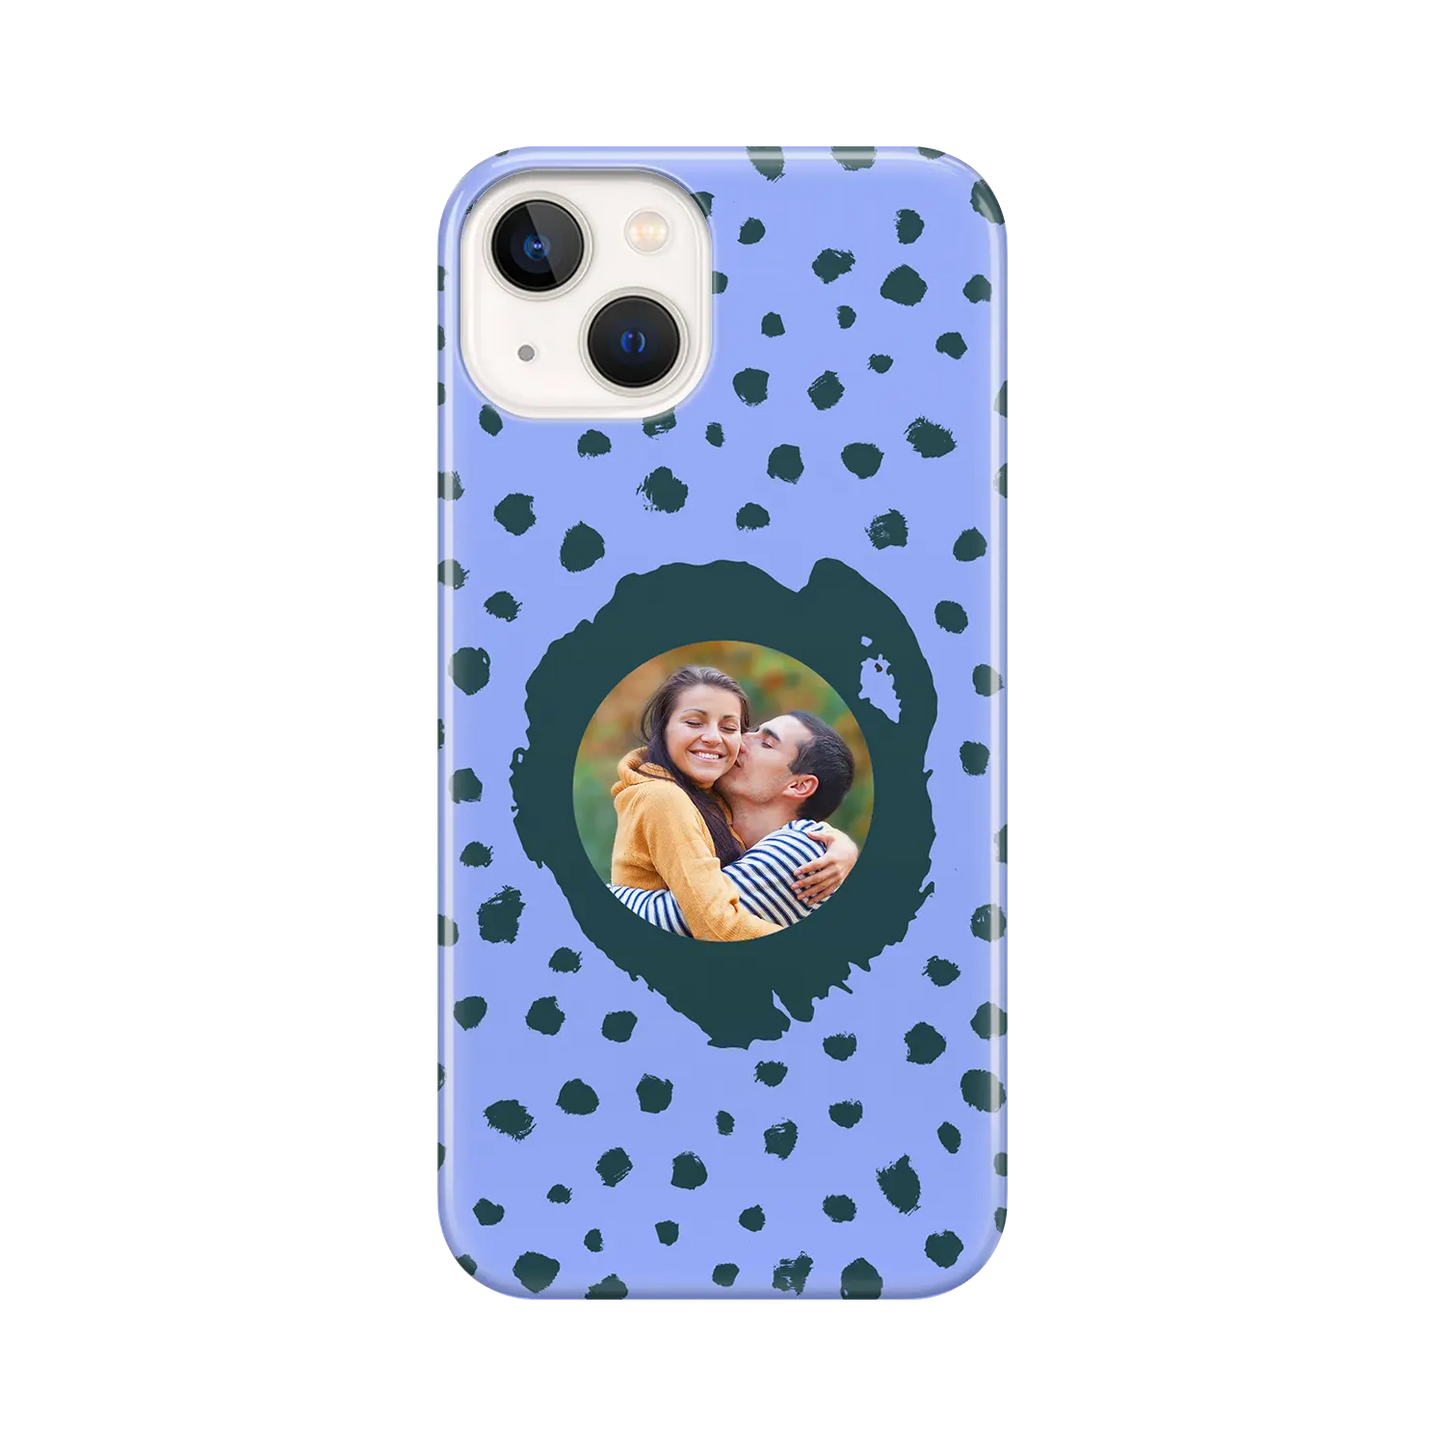 Grunge Dots Photo Style - Coque iPhone Personnalisée